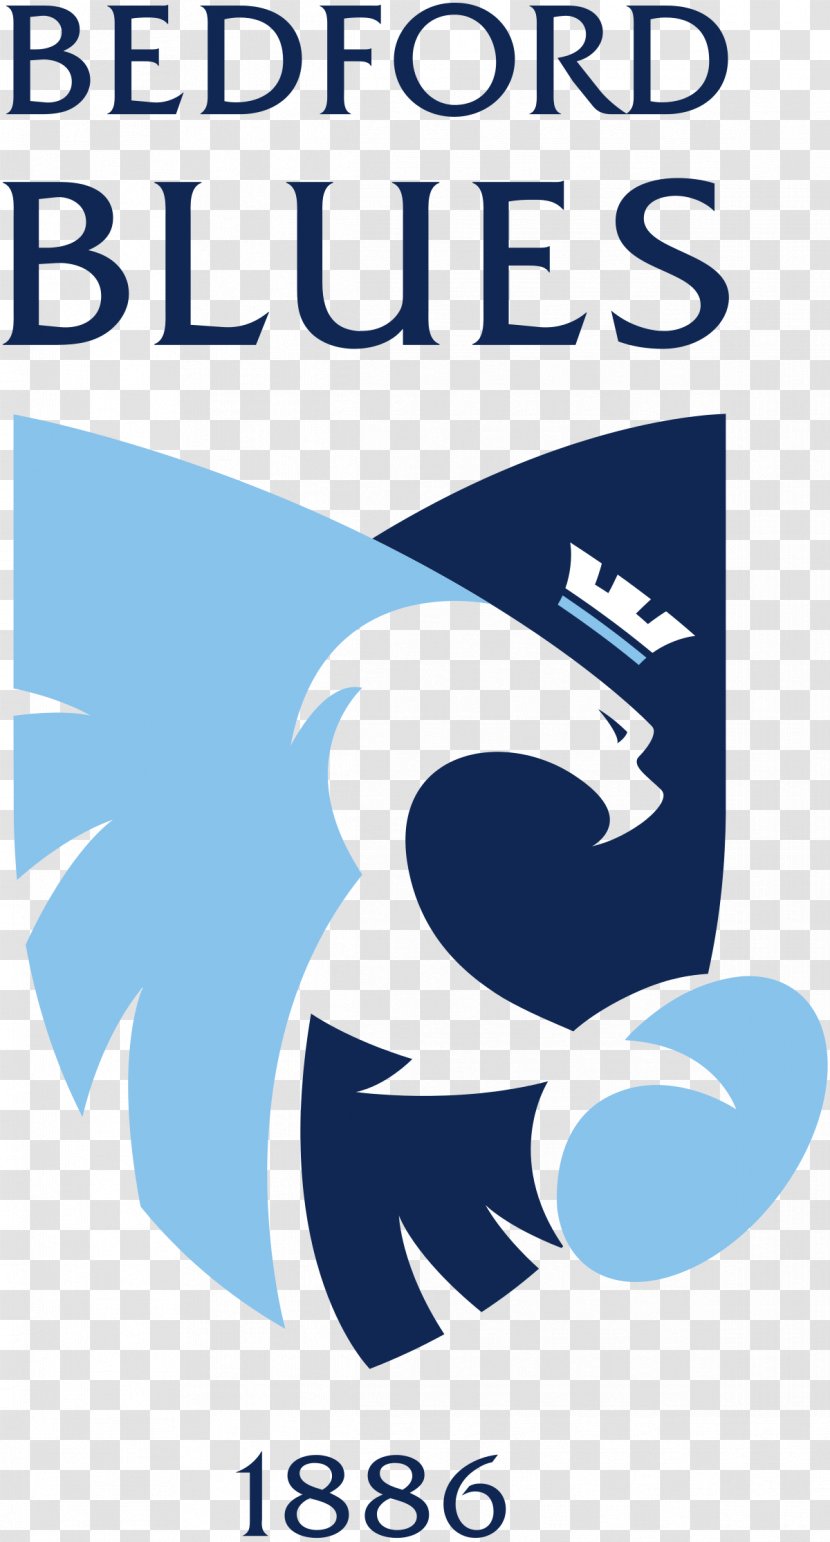 Bedford Blues Cornish Pirates Kimberley College Rugby Union - Brand - Proshor Transparent PNG